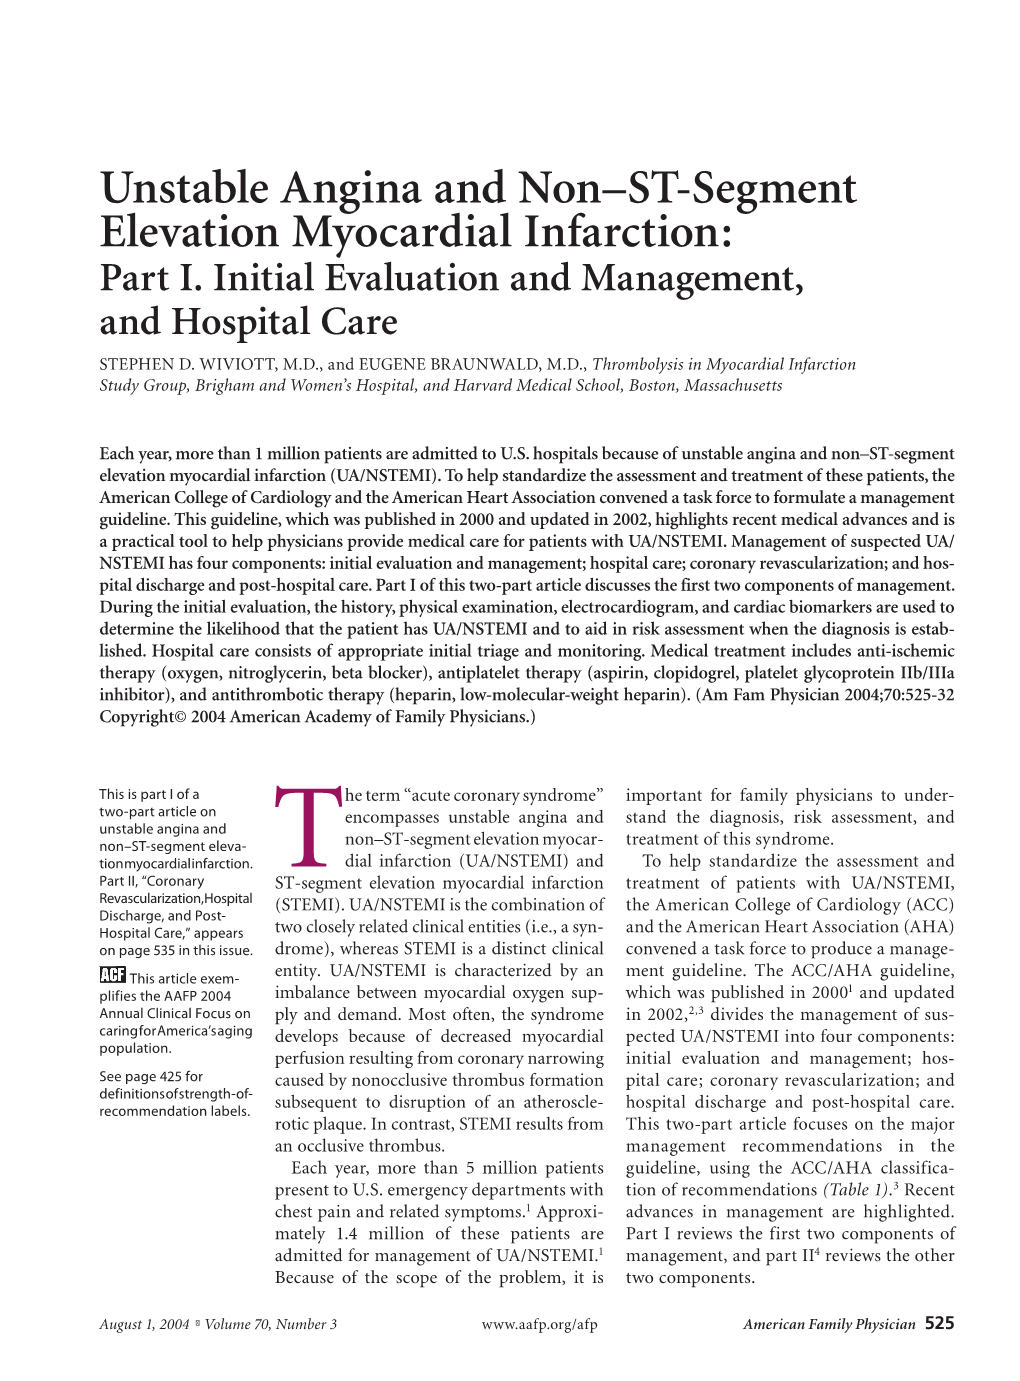 Unstable Angina and Non–ST-Segment Elevation Myocardial Infarction: Part I